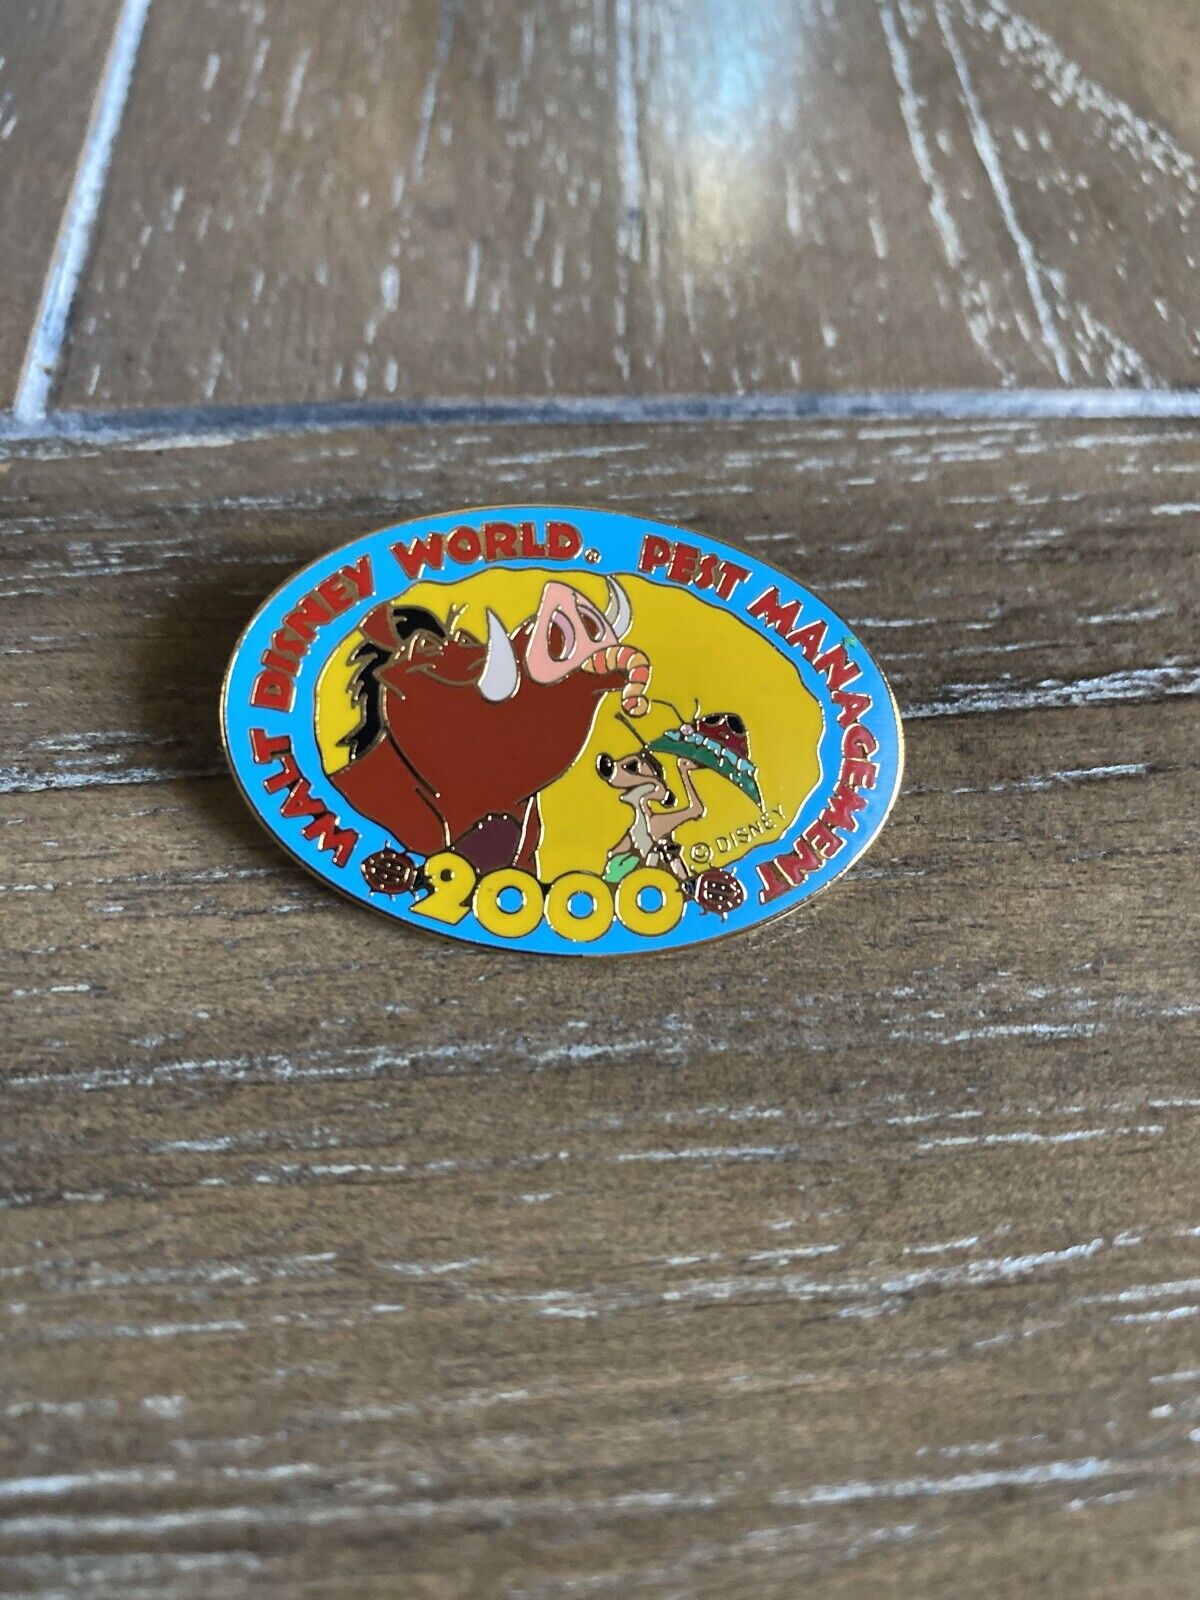 2000 WALT DISNEY WORLD LION KING PUMBAA AND TIMON WITH BUGS PEST MANAGEMENT PIN